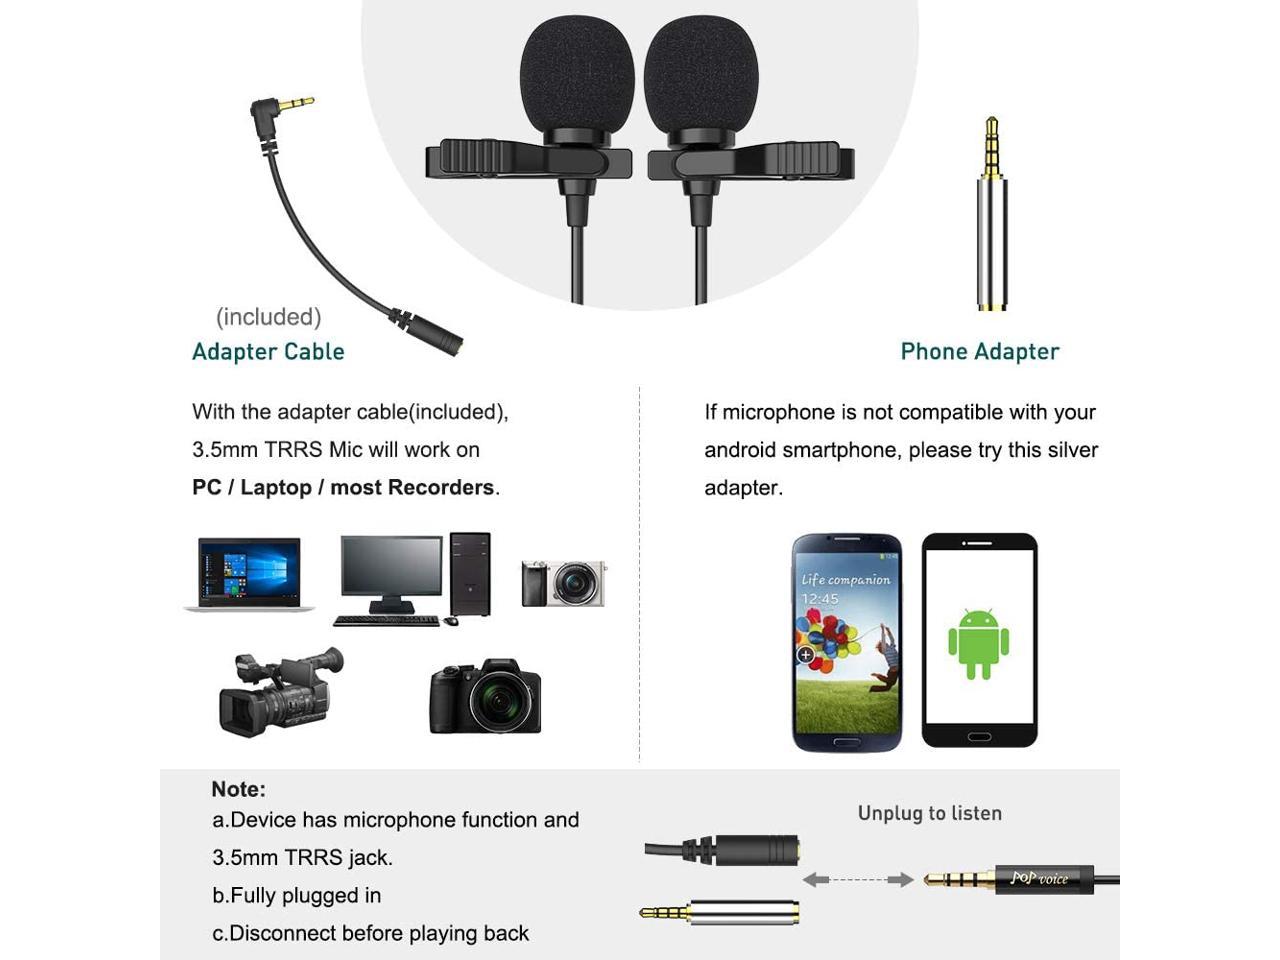 Premium 196 Dual-Head Lavalier Microphone Professional Lapel Clip-on Omnidirectional Condenser Mic for Apple iPhone,Android,PC,Recording 